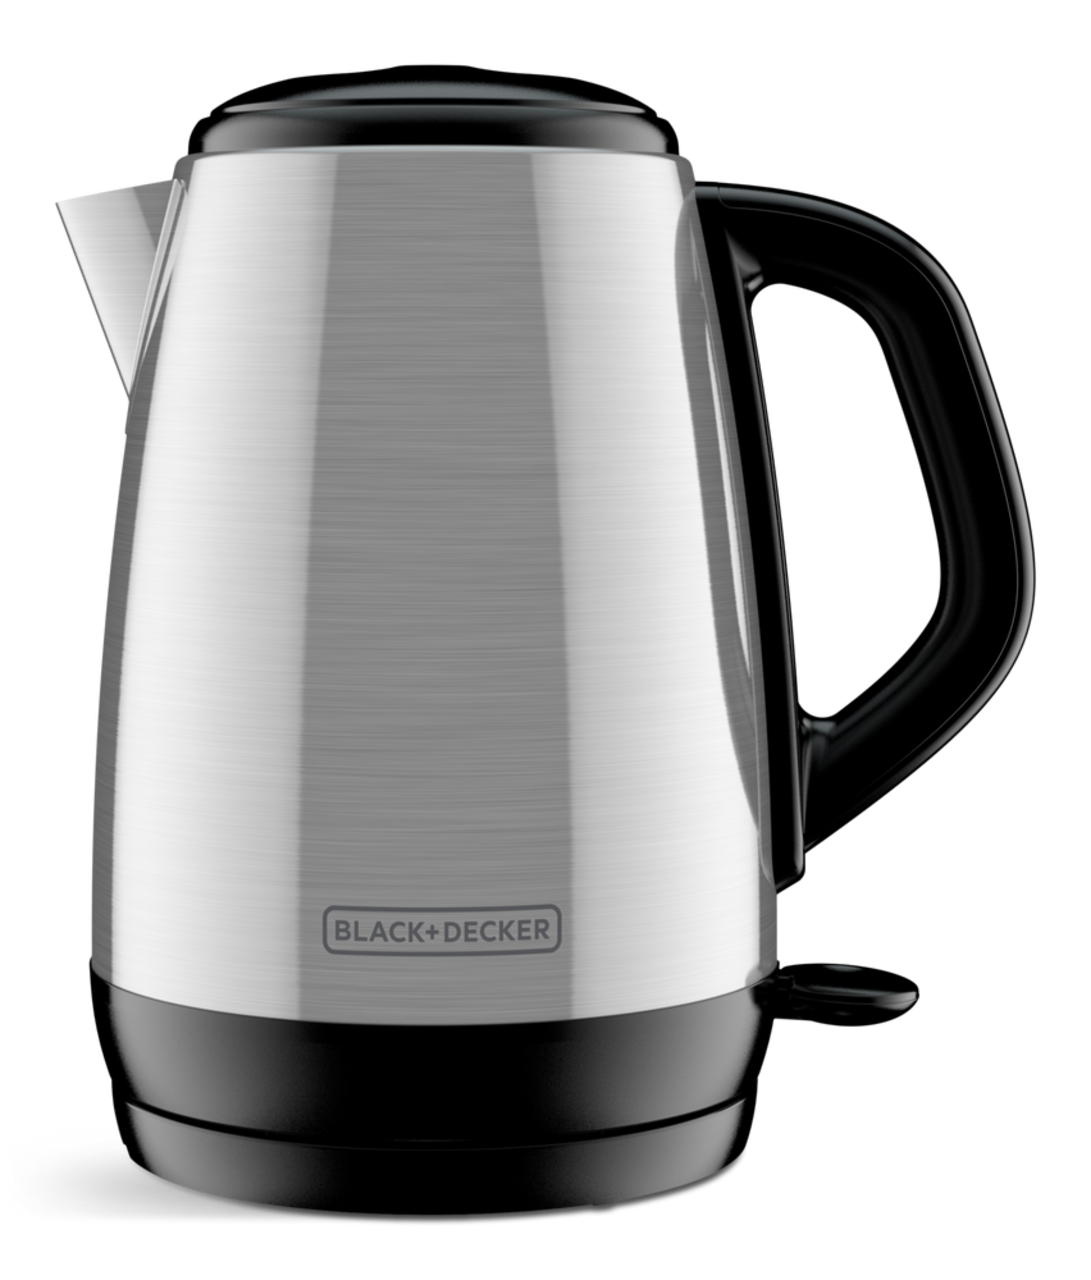 https://media-www.canadiantire.ca/product/living/kitchen/kitchen-appliances/0431027/black-and-decker-stainless-steel-1-7l-kettle-b3fd675c-e601-4efd-bacc-63ce508d7acb.png?imdensity=1&imwidth=1244&impolicy=mZoom